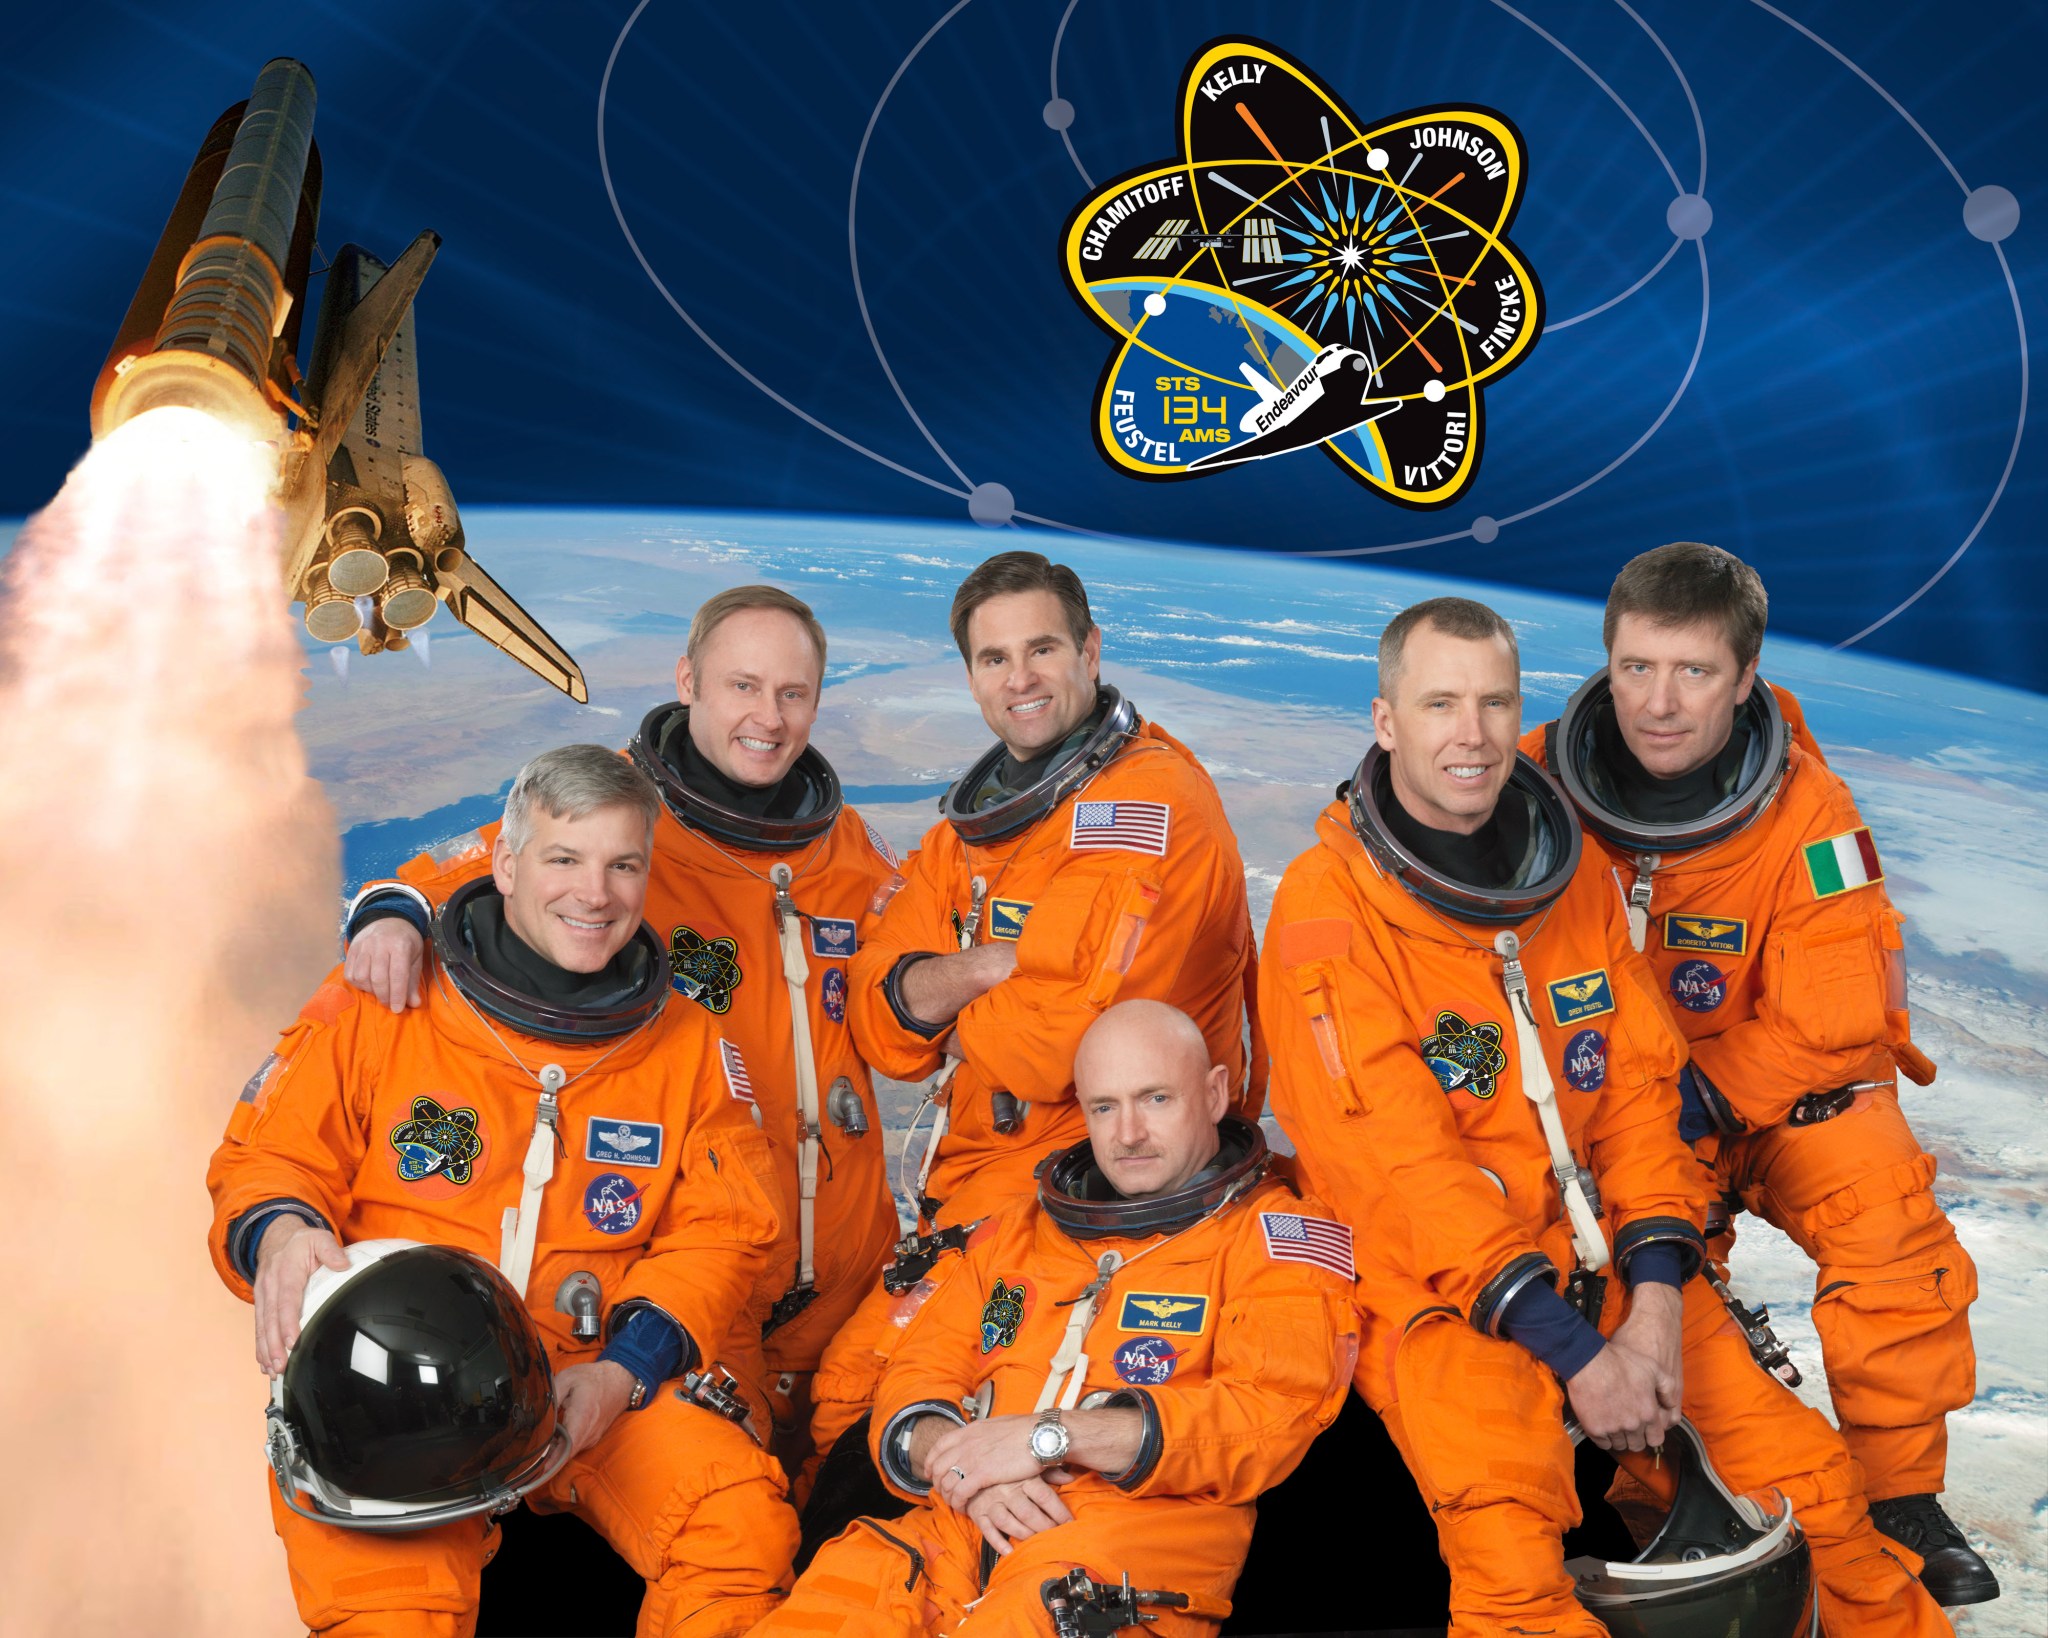 Portrait of STS-134 crew with mission patch and shuttle in background.